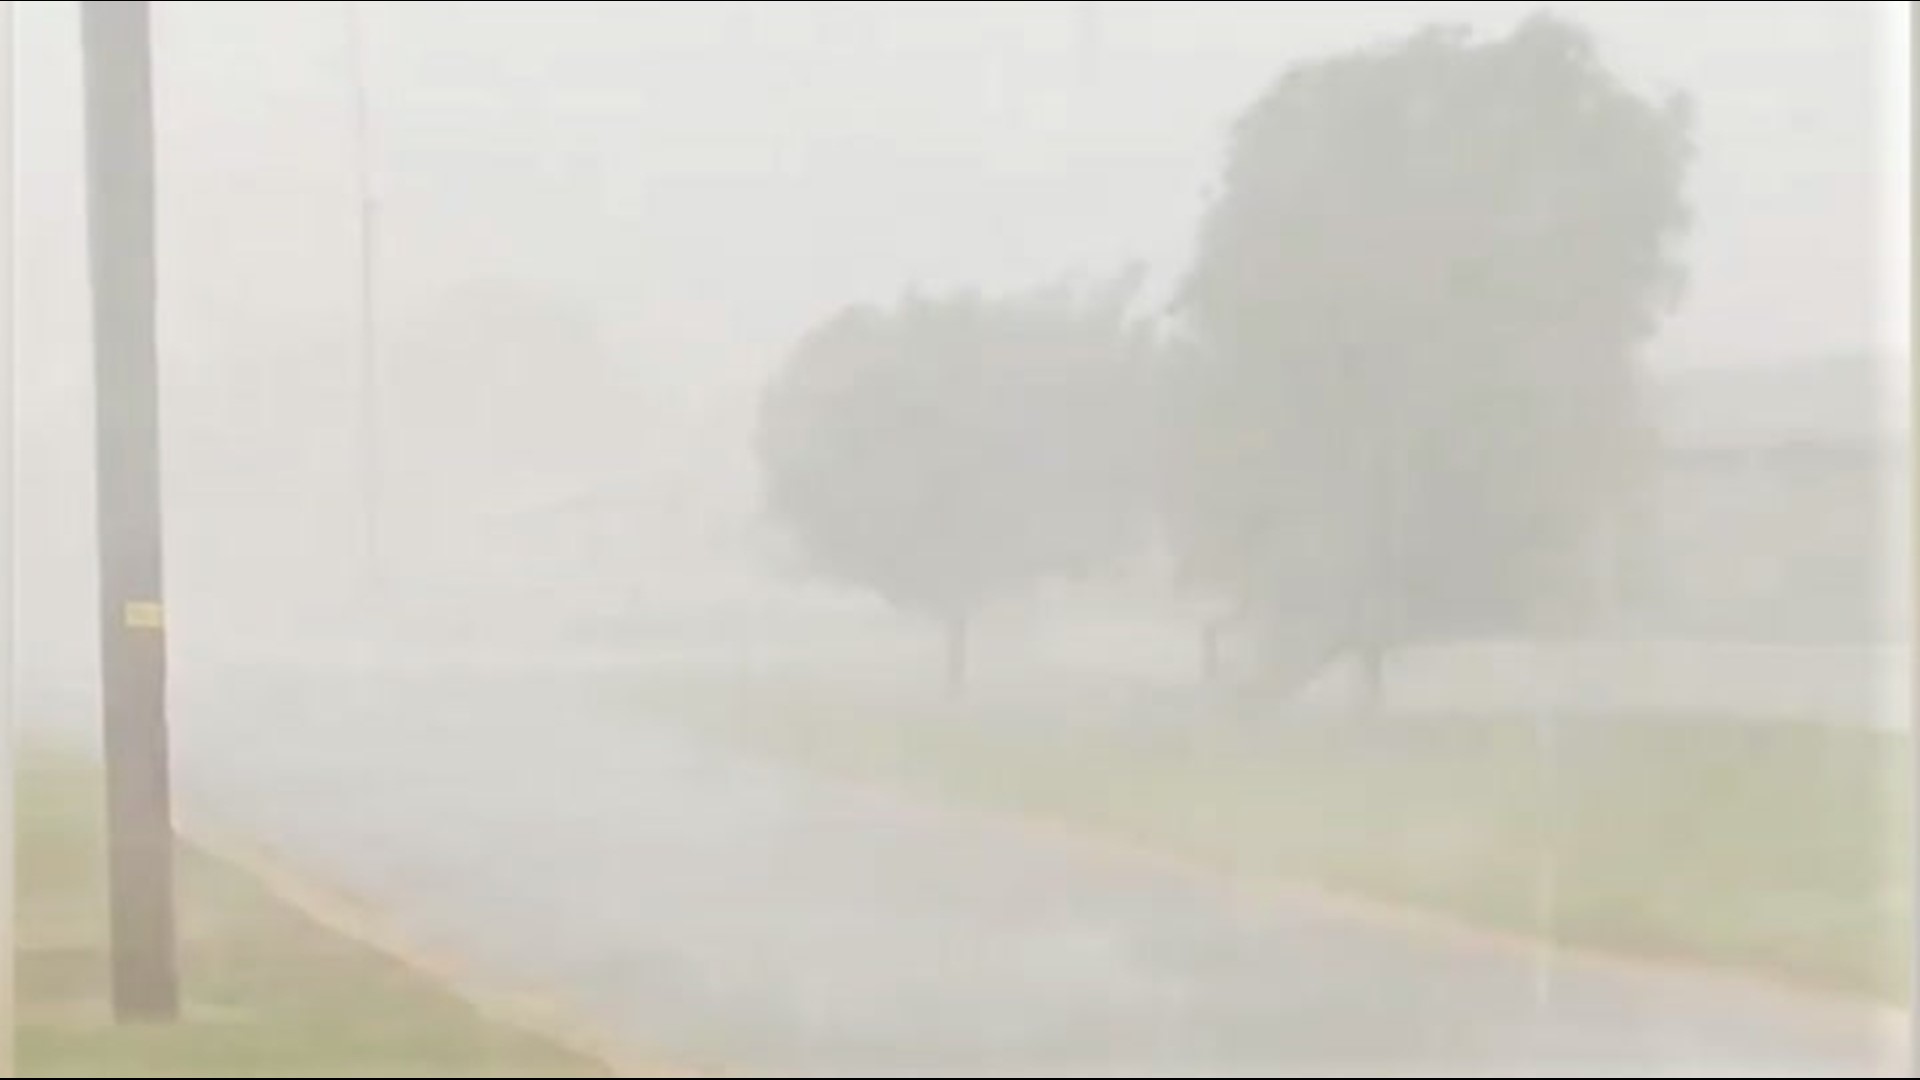 This chaotic footage was taken shortly before a confirmed tornado touched down in Pike County, Alabama, on March 31.